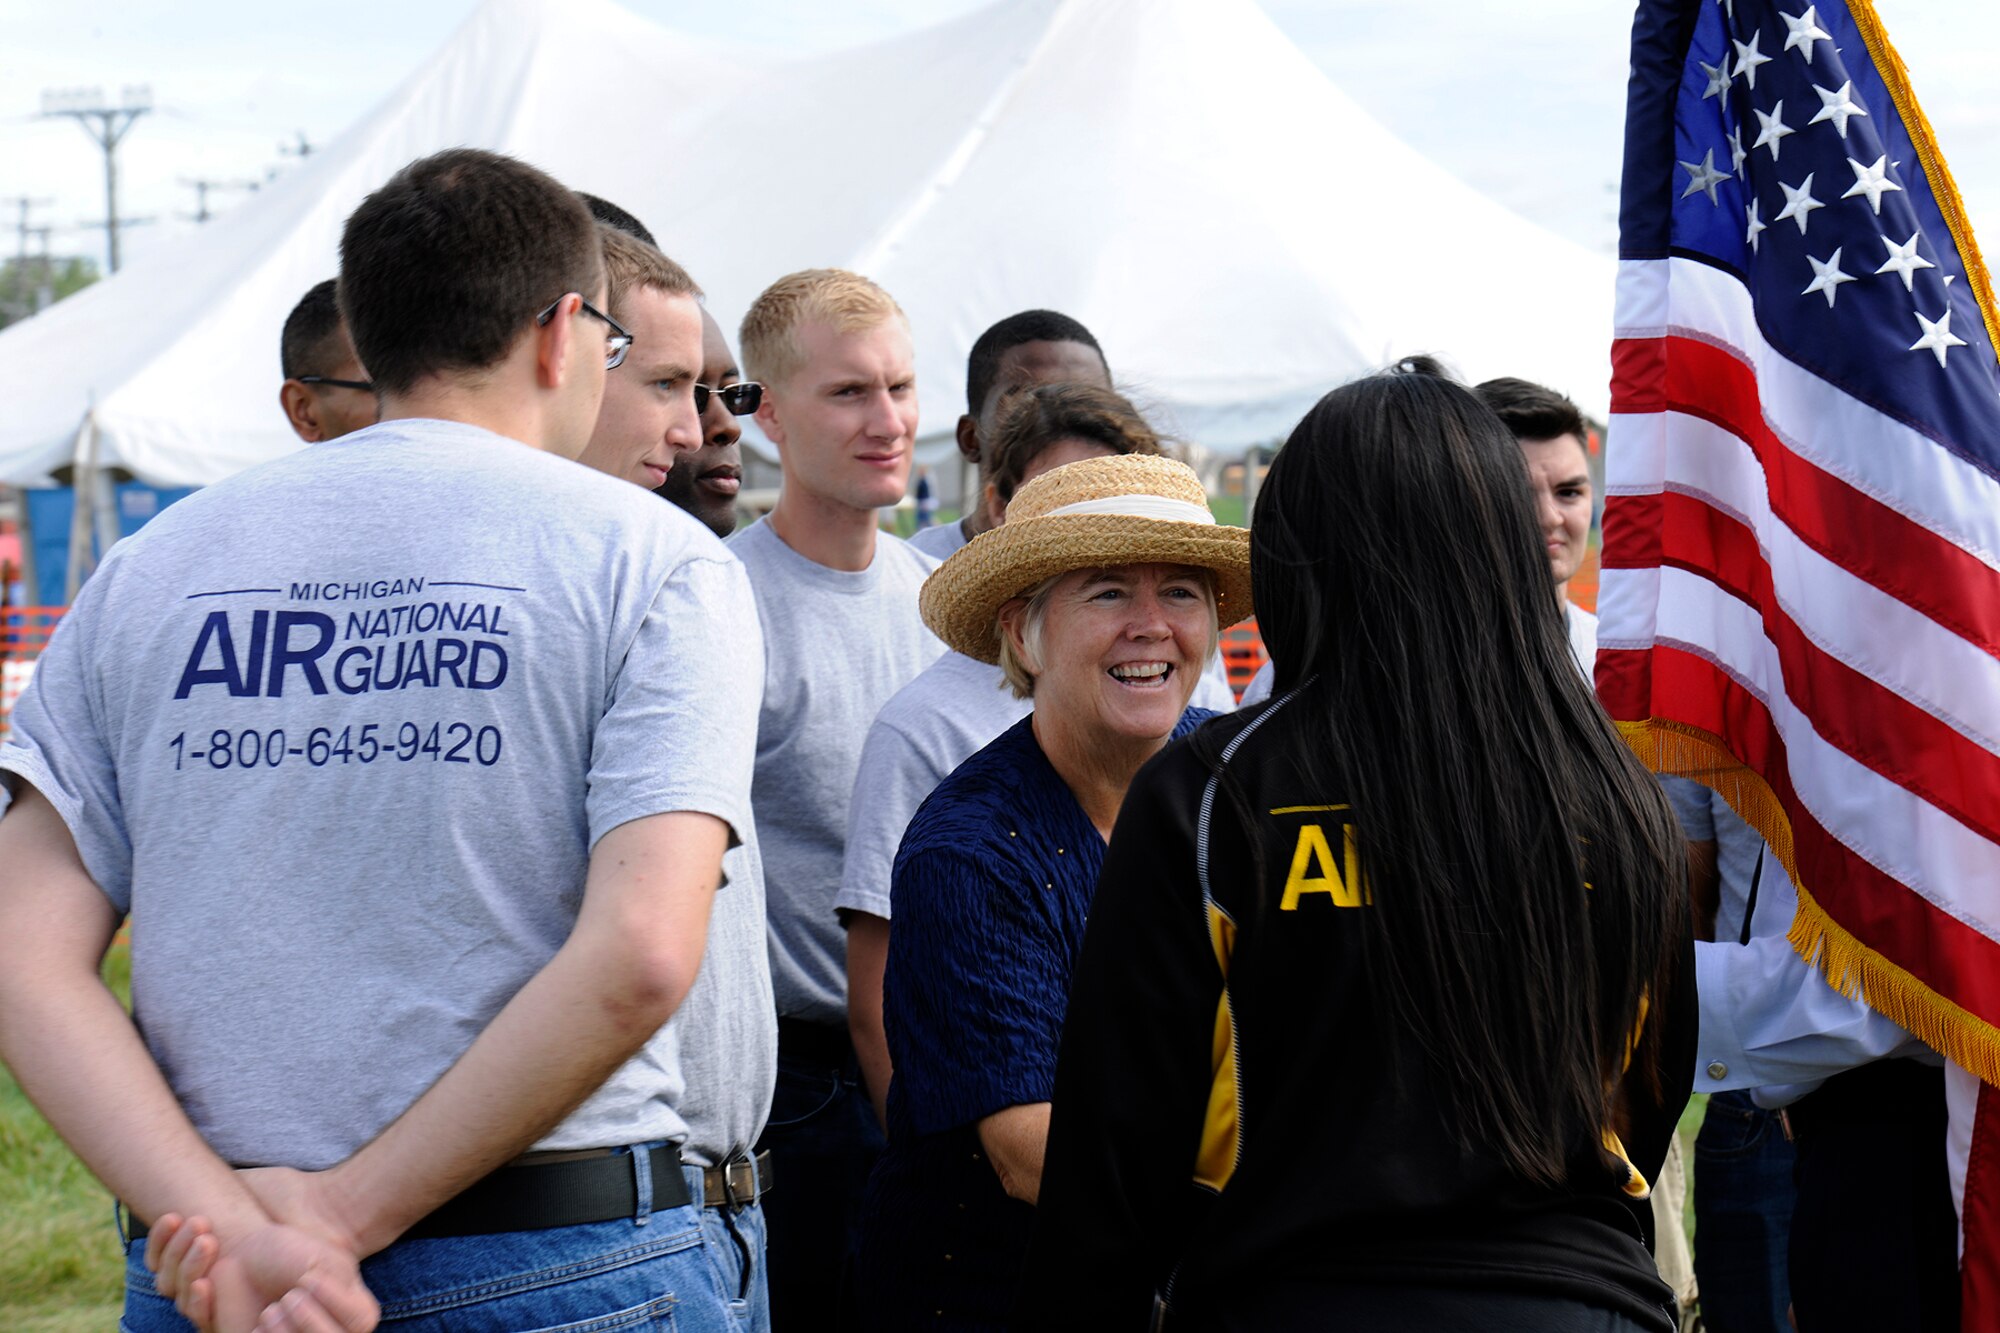 U.S. Rep. Candice Miller (R-Michigan) congratulates new enlistees in the Michigan Air National Guard moments after they were sworn in during a ceremony at the 2014 Selfridge Open House & Air Show, Sept. 6, 2014. The new Airmen will serve in various capacities in the 1,700-member 127th Wing, which is based at Selfridge Air National Guard Base, Mich. (U.S. Air National Guard photo by Master Sgt. David Kujawa)